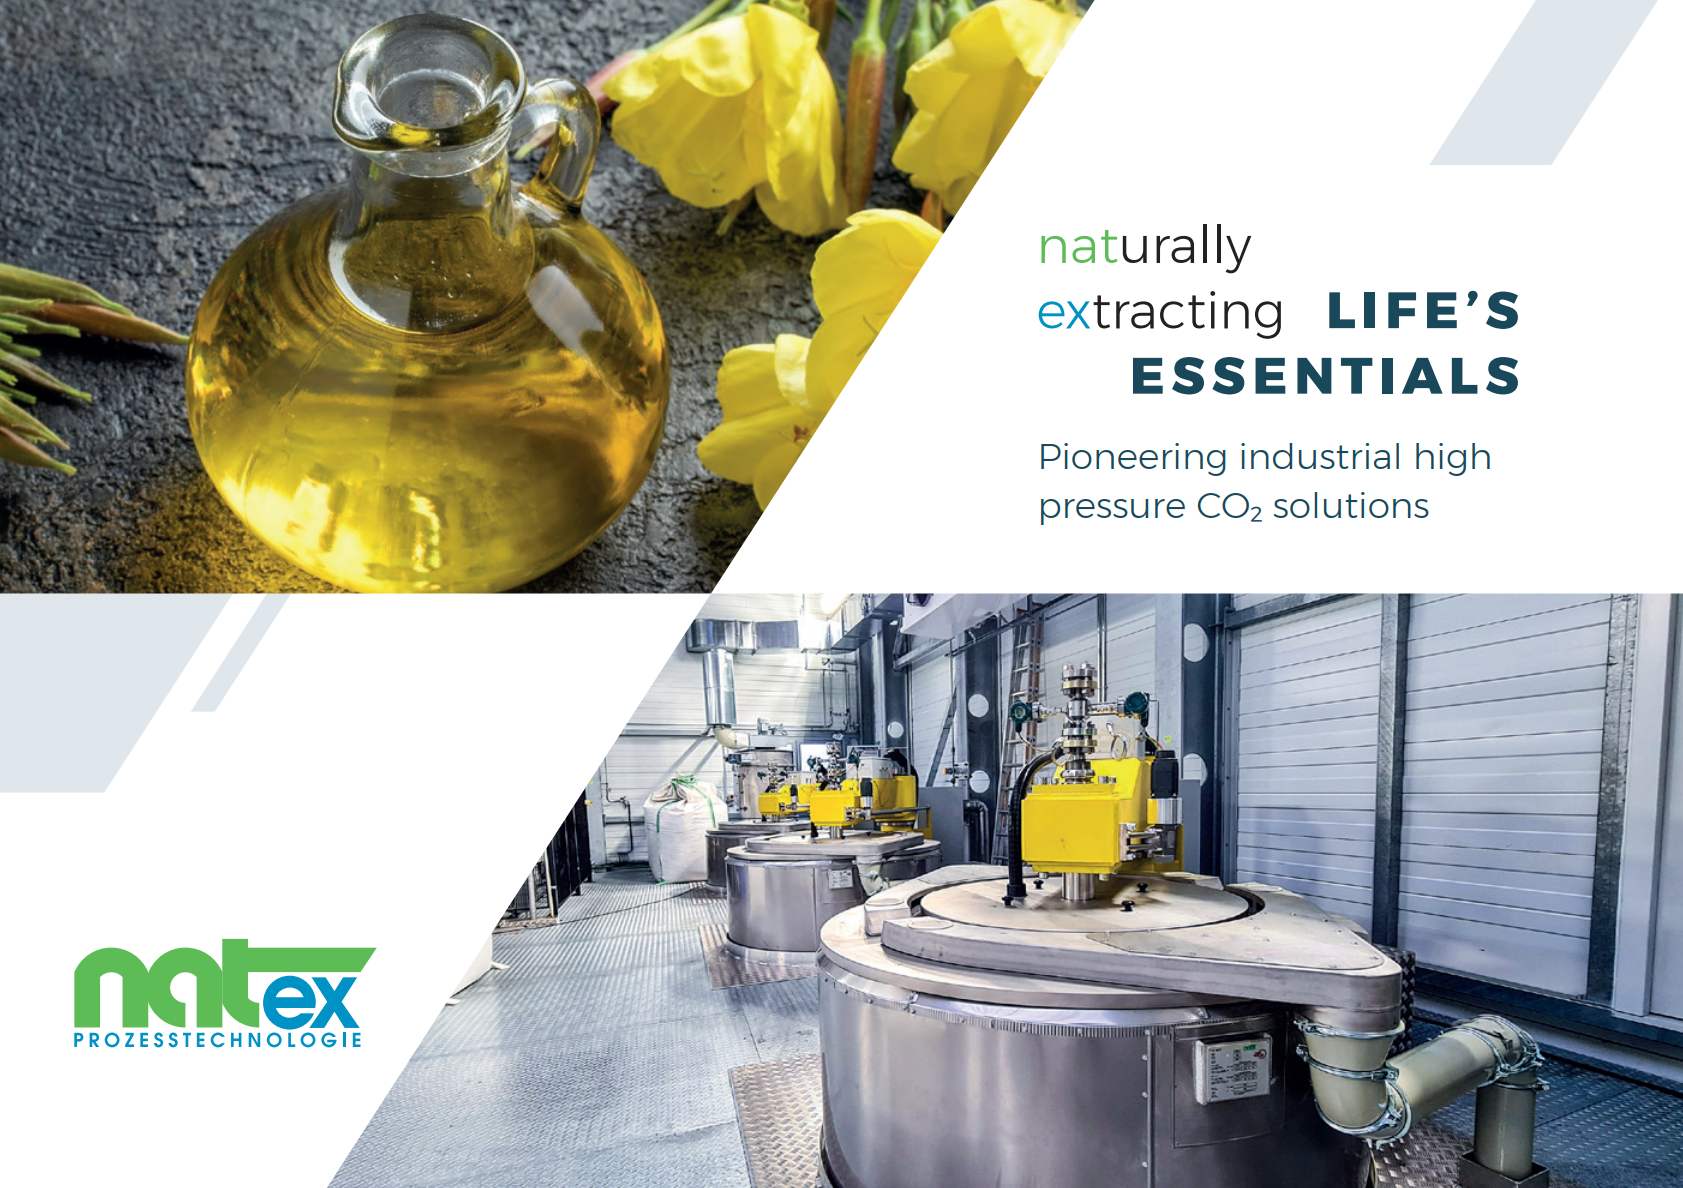 Natex - Industrial CO2 Extraction (Naturally extracting lifes essentials)